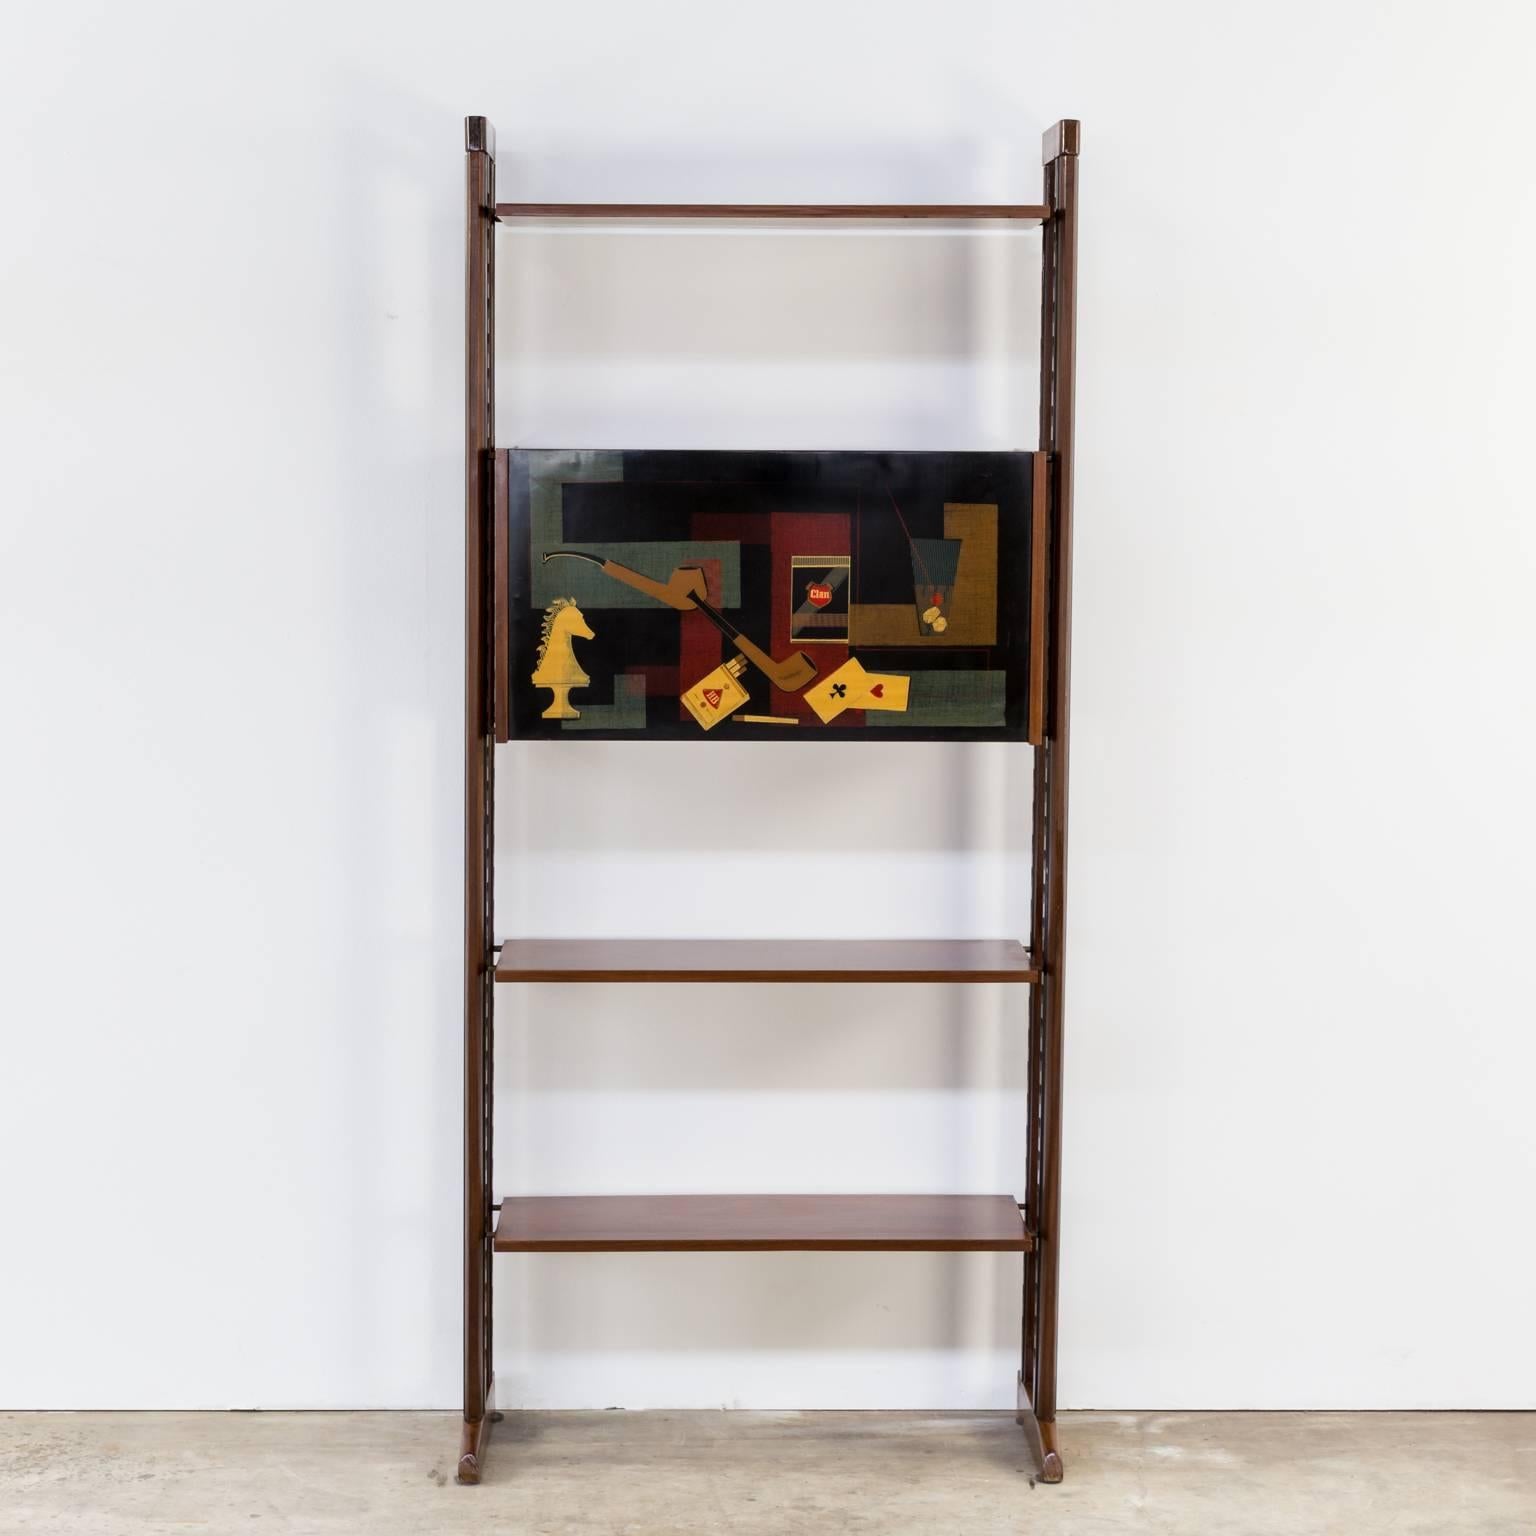 1950s Vittorio Dassi (1893-1973 Milan) style wall unit cabinet, with three shelves. Nice metal system in the legs of the unit. Beautiful shaped teak framing, nice artwork 'smoking and gaming' on the flapdoor. Good condition wear consistent with age